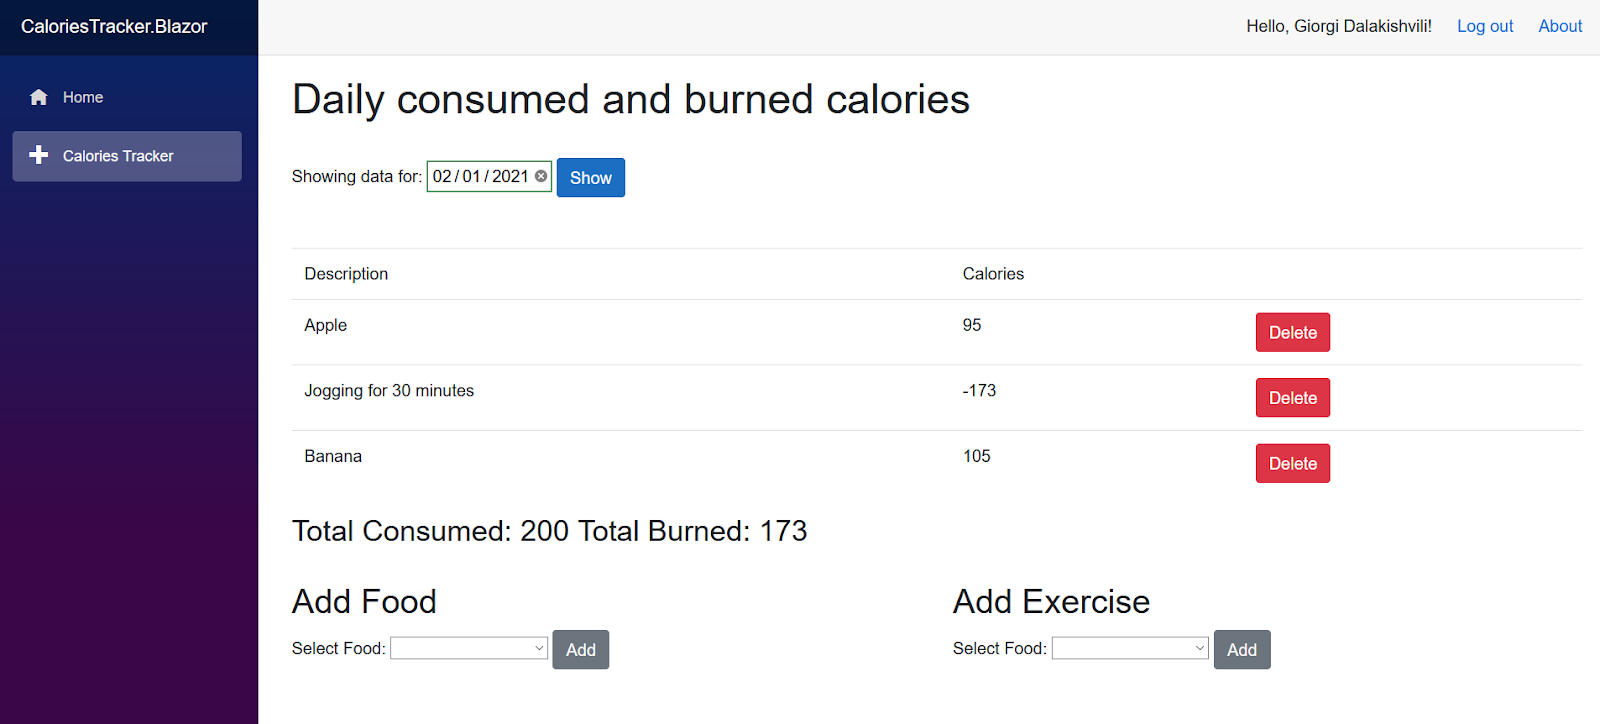 Screenshot of CaloriesTracker interface showing 'Daily consumed and burned calories'